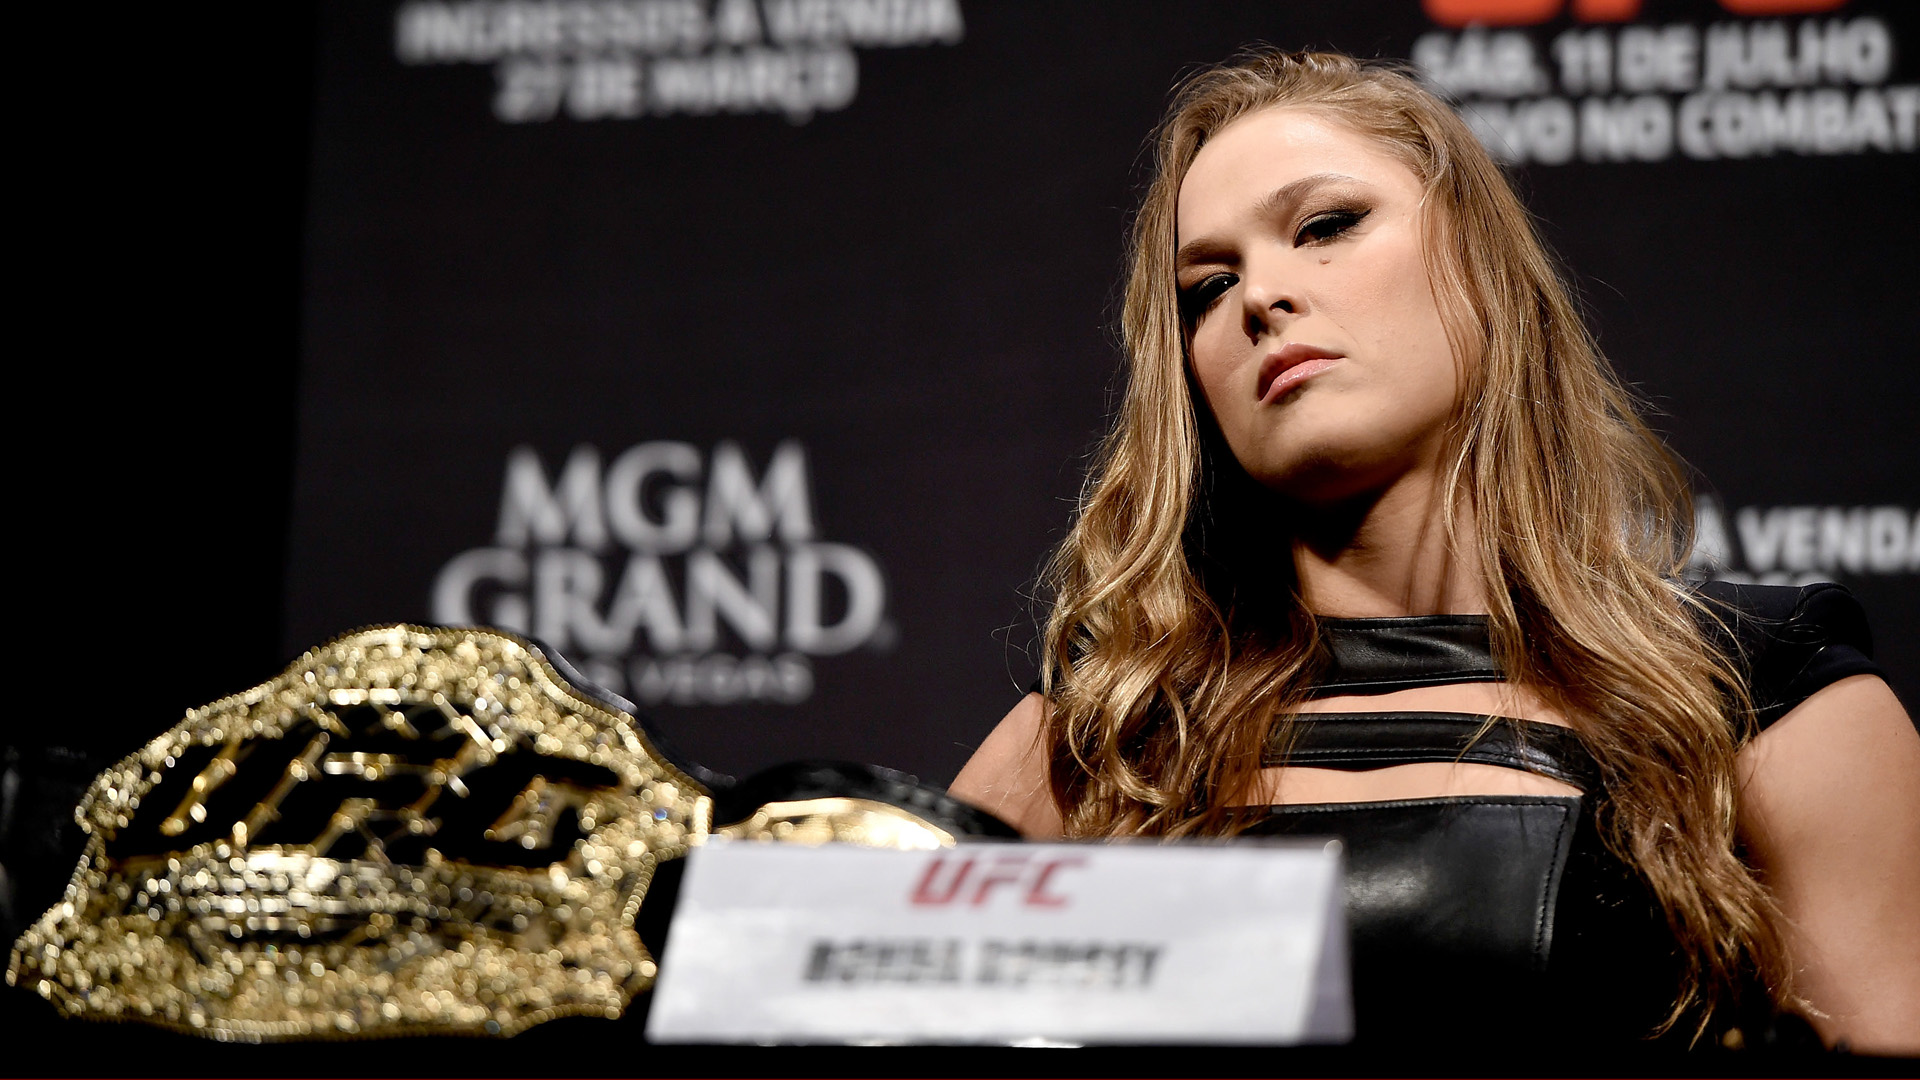 UFC star Ronda Rousey looks on during a press conference. (Getty)